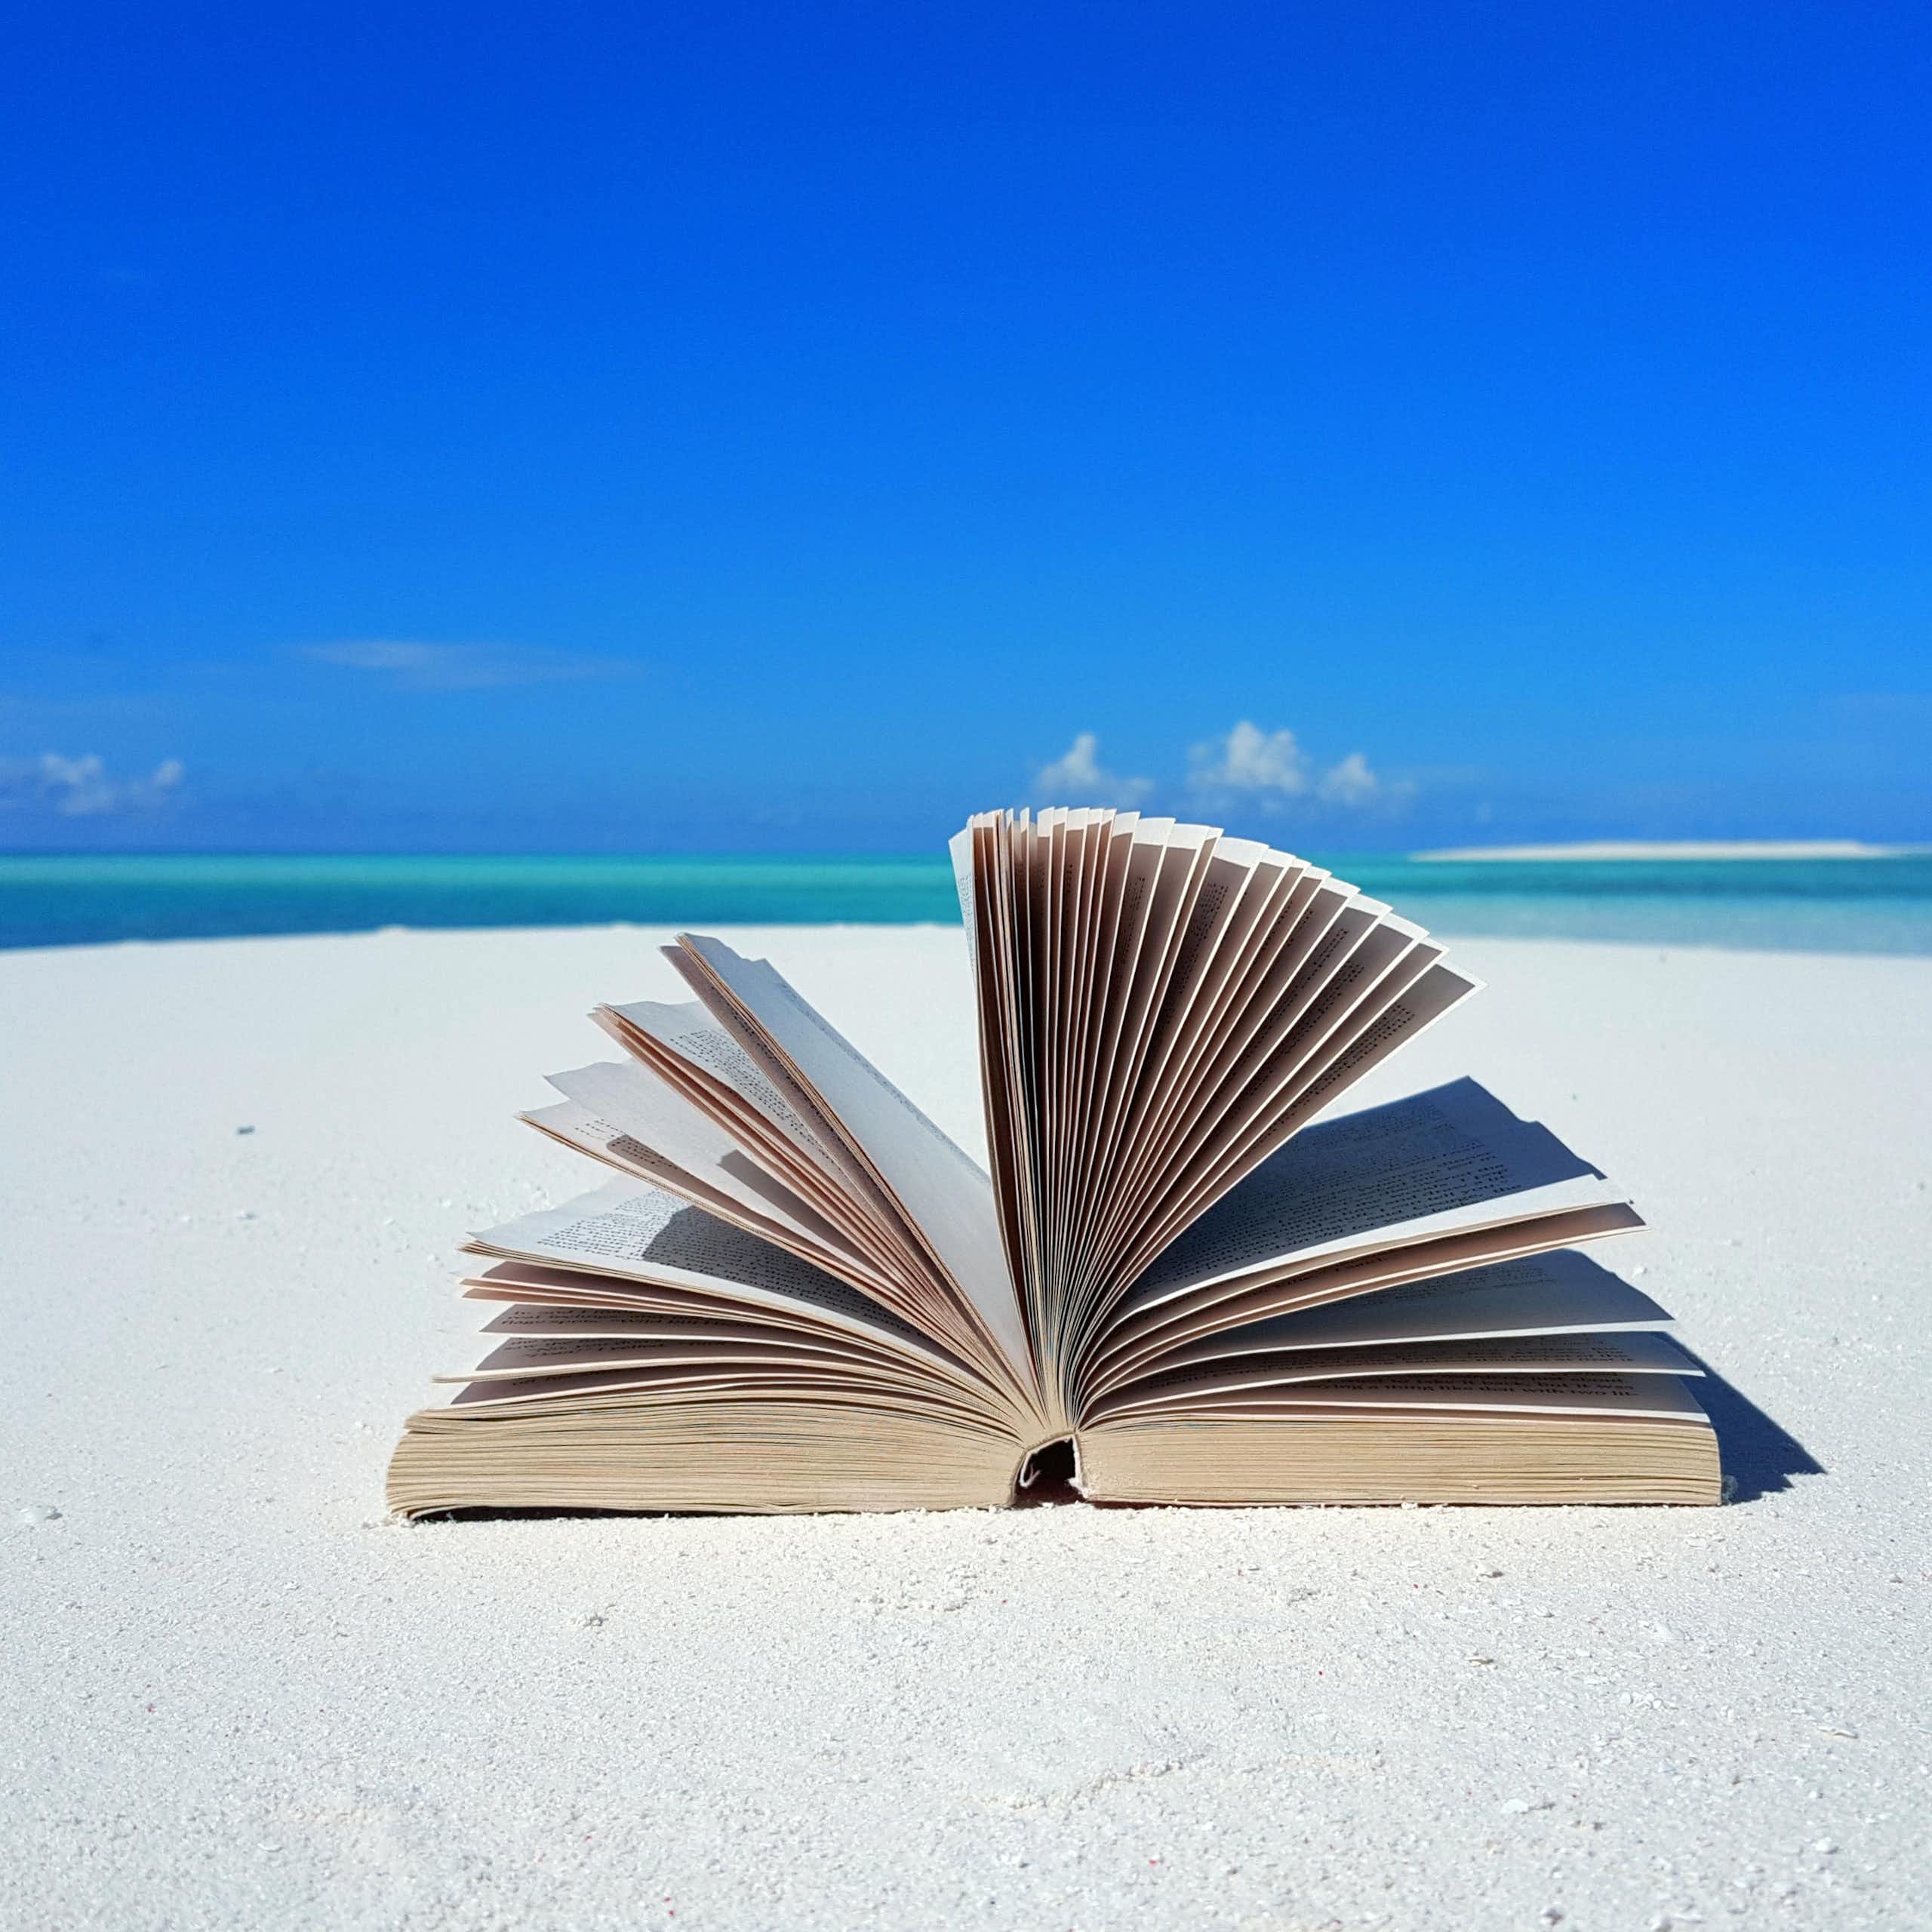 An open book lies on a white sandy beach against the backdrop of a mostly clear blue sky.